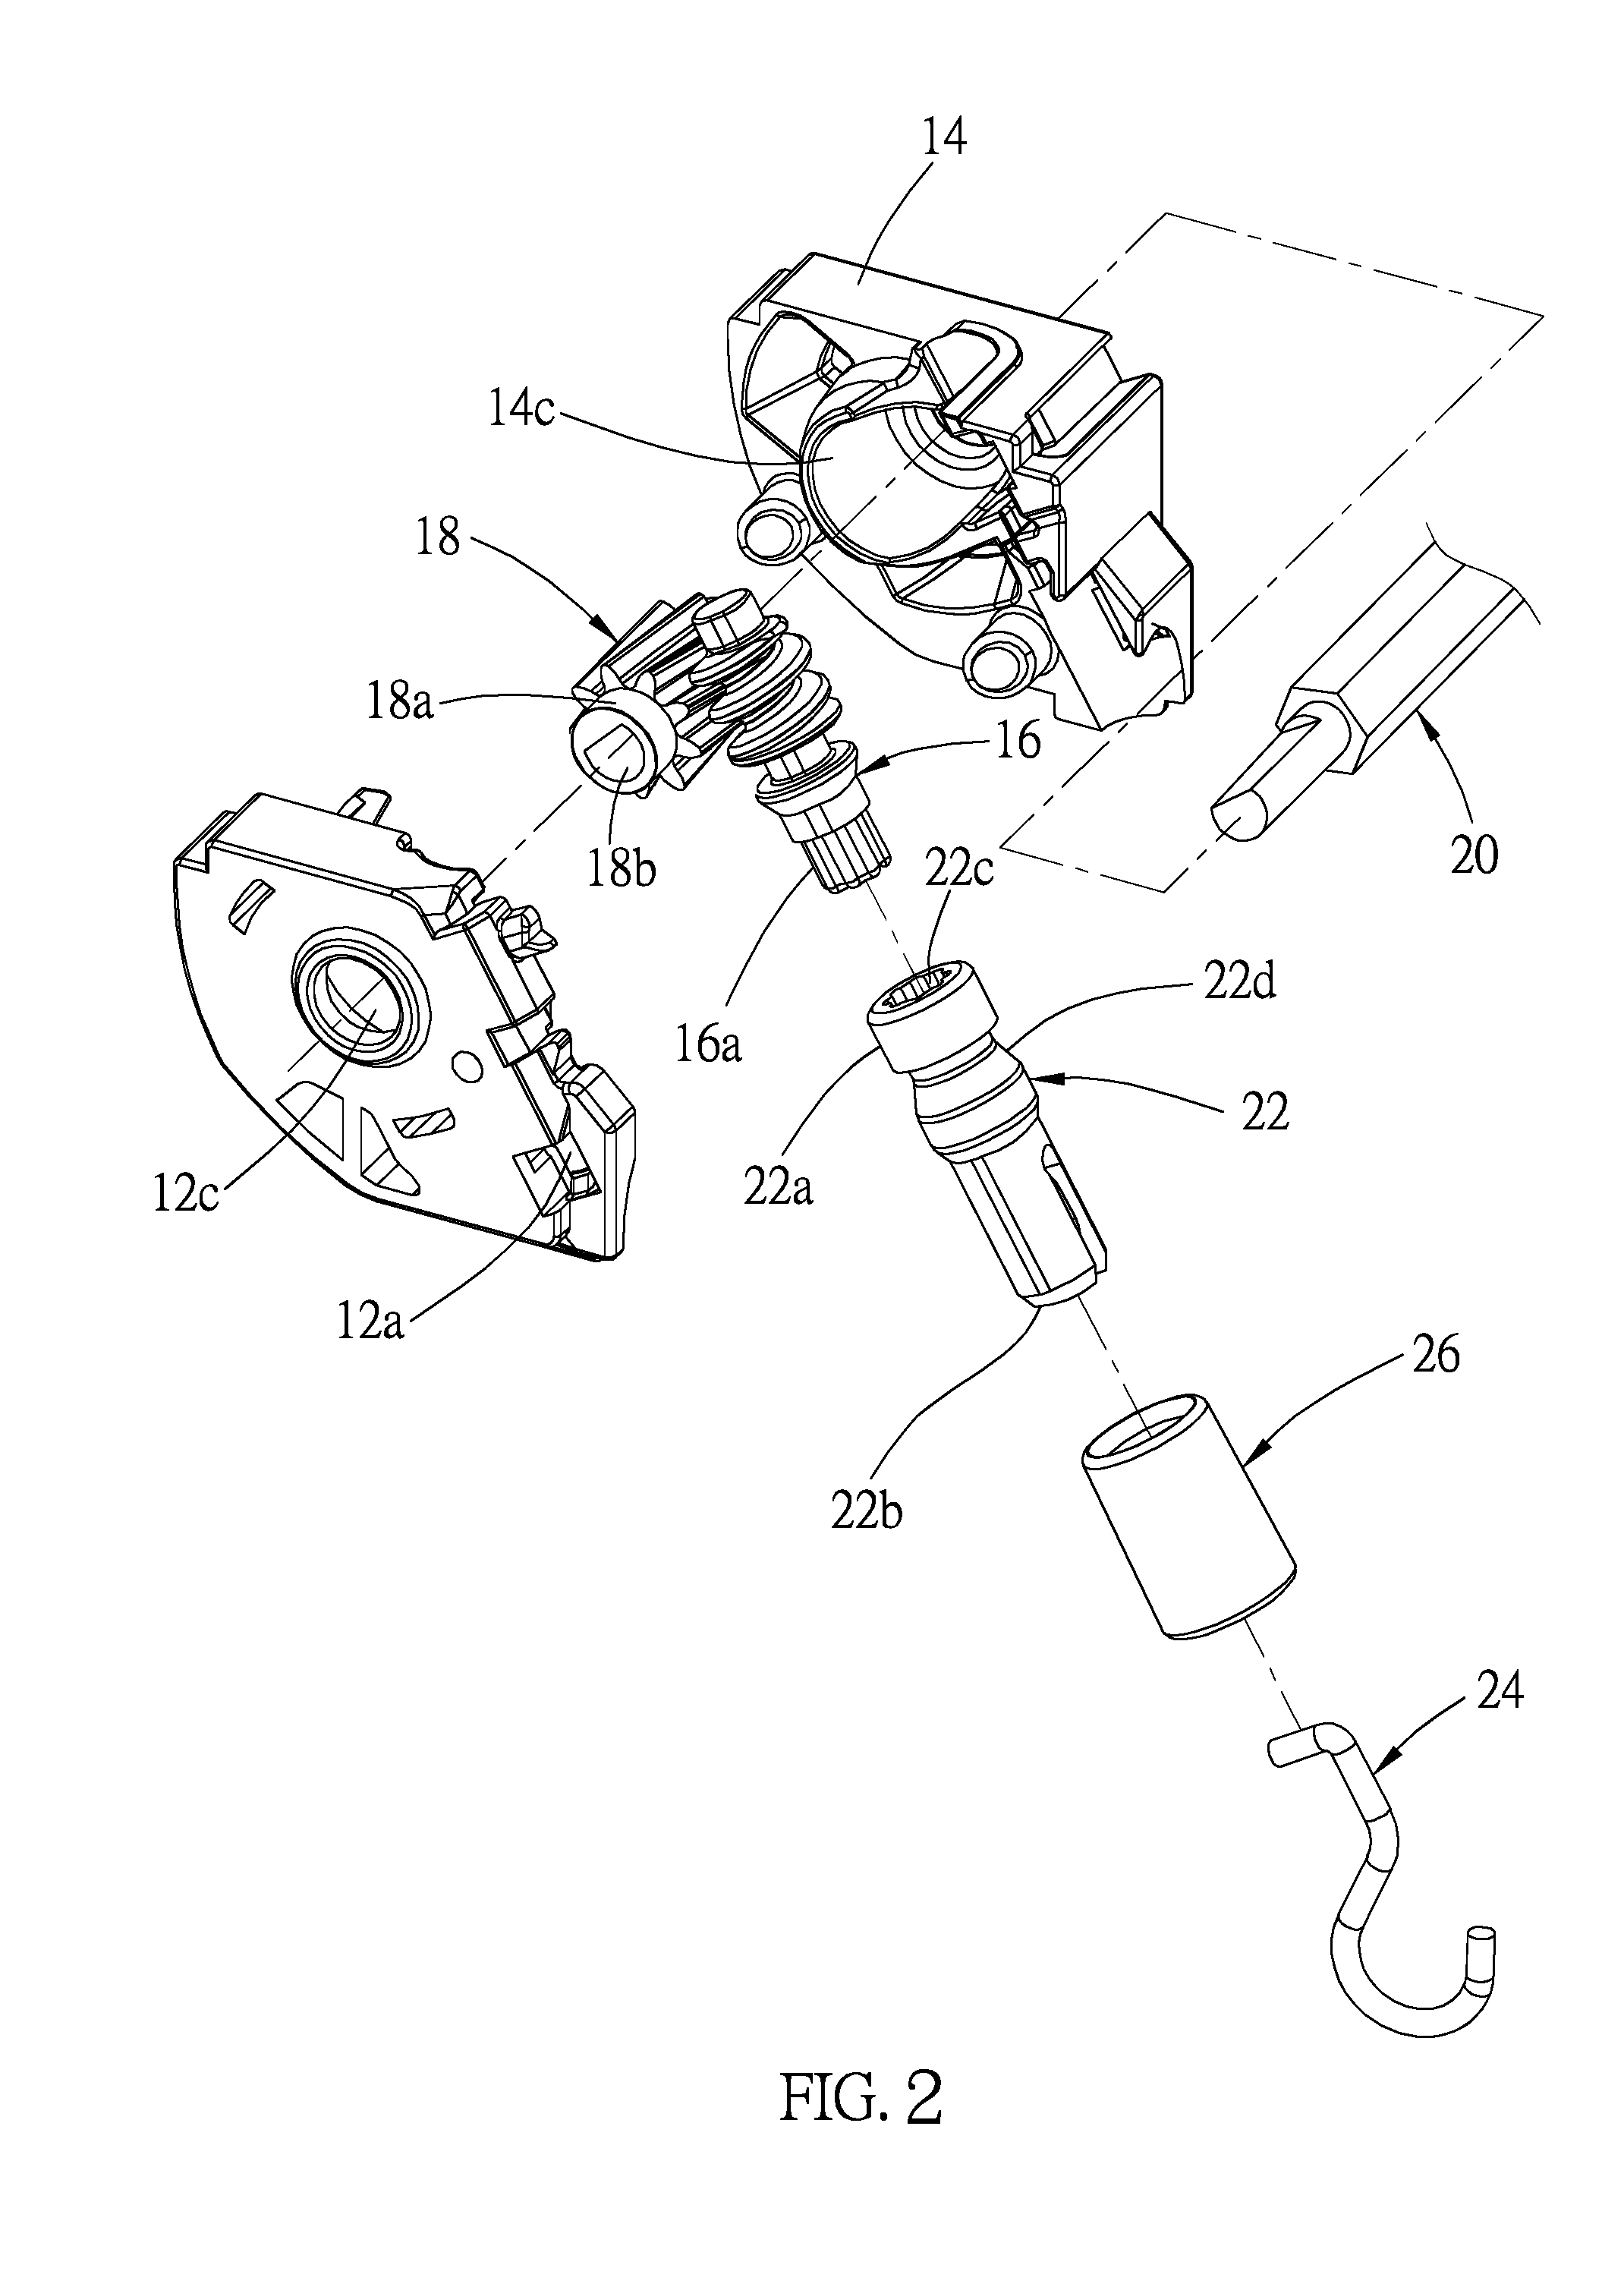 Separable tilting device